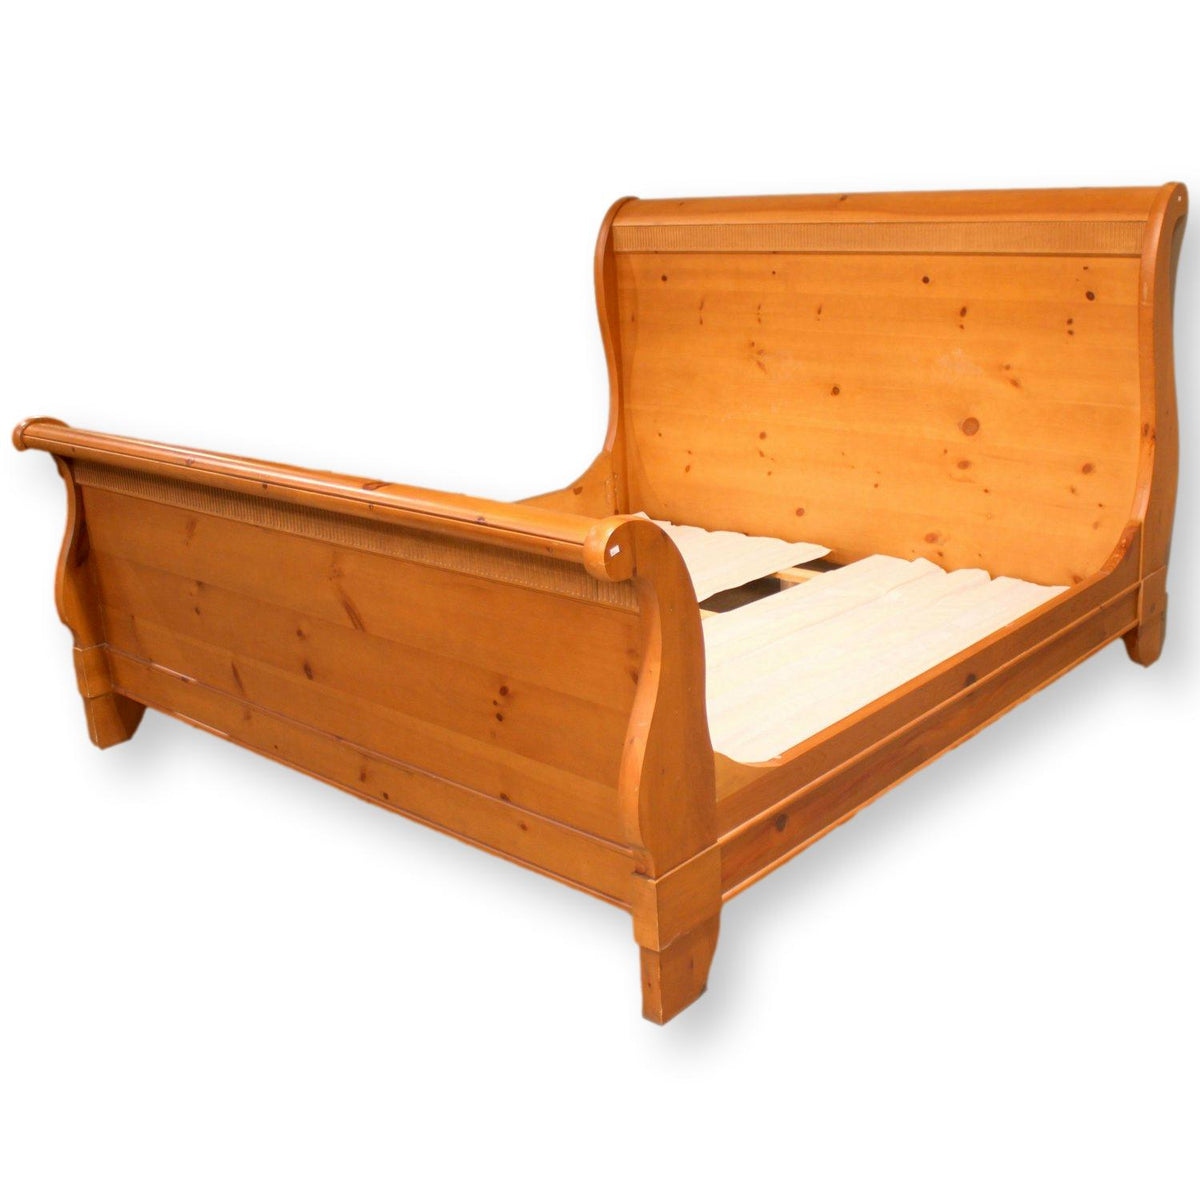 'Legacy' King Size Pine Sleigh Bed